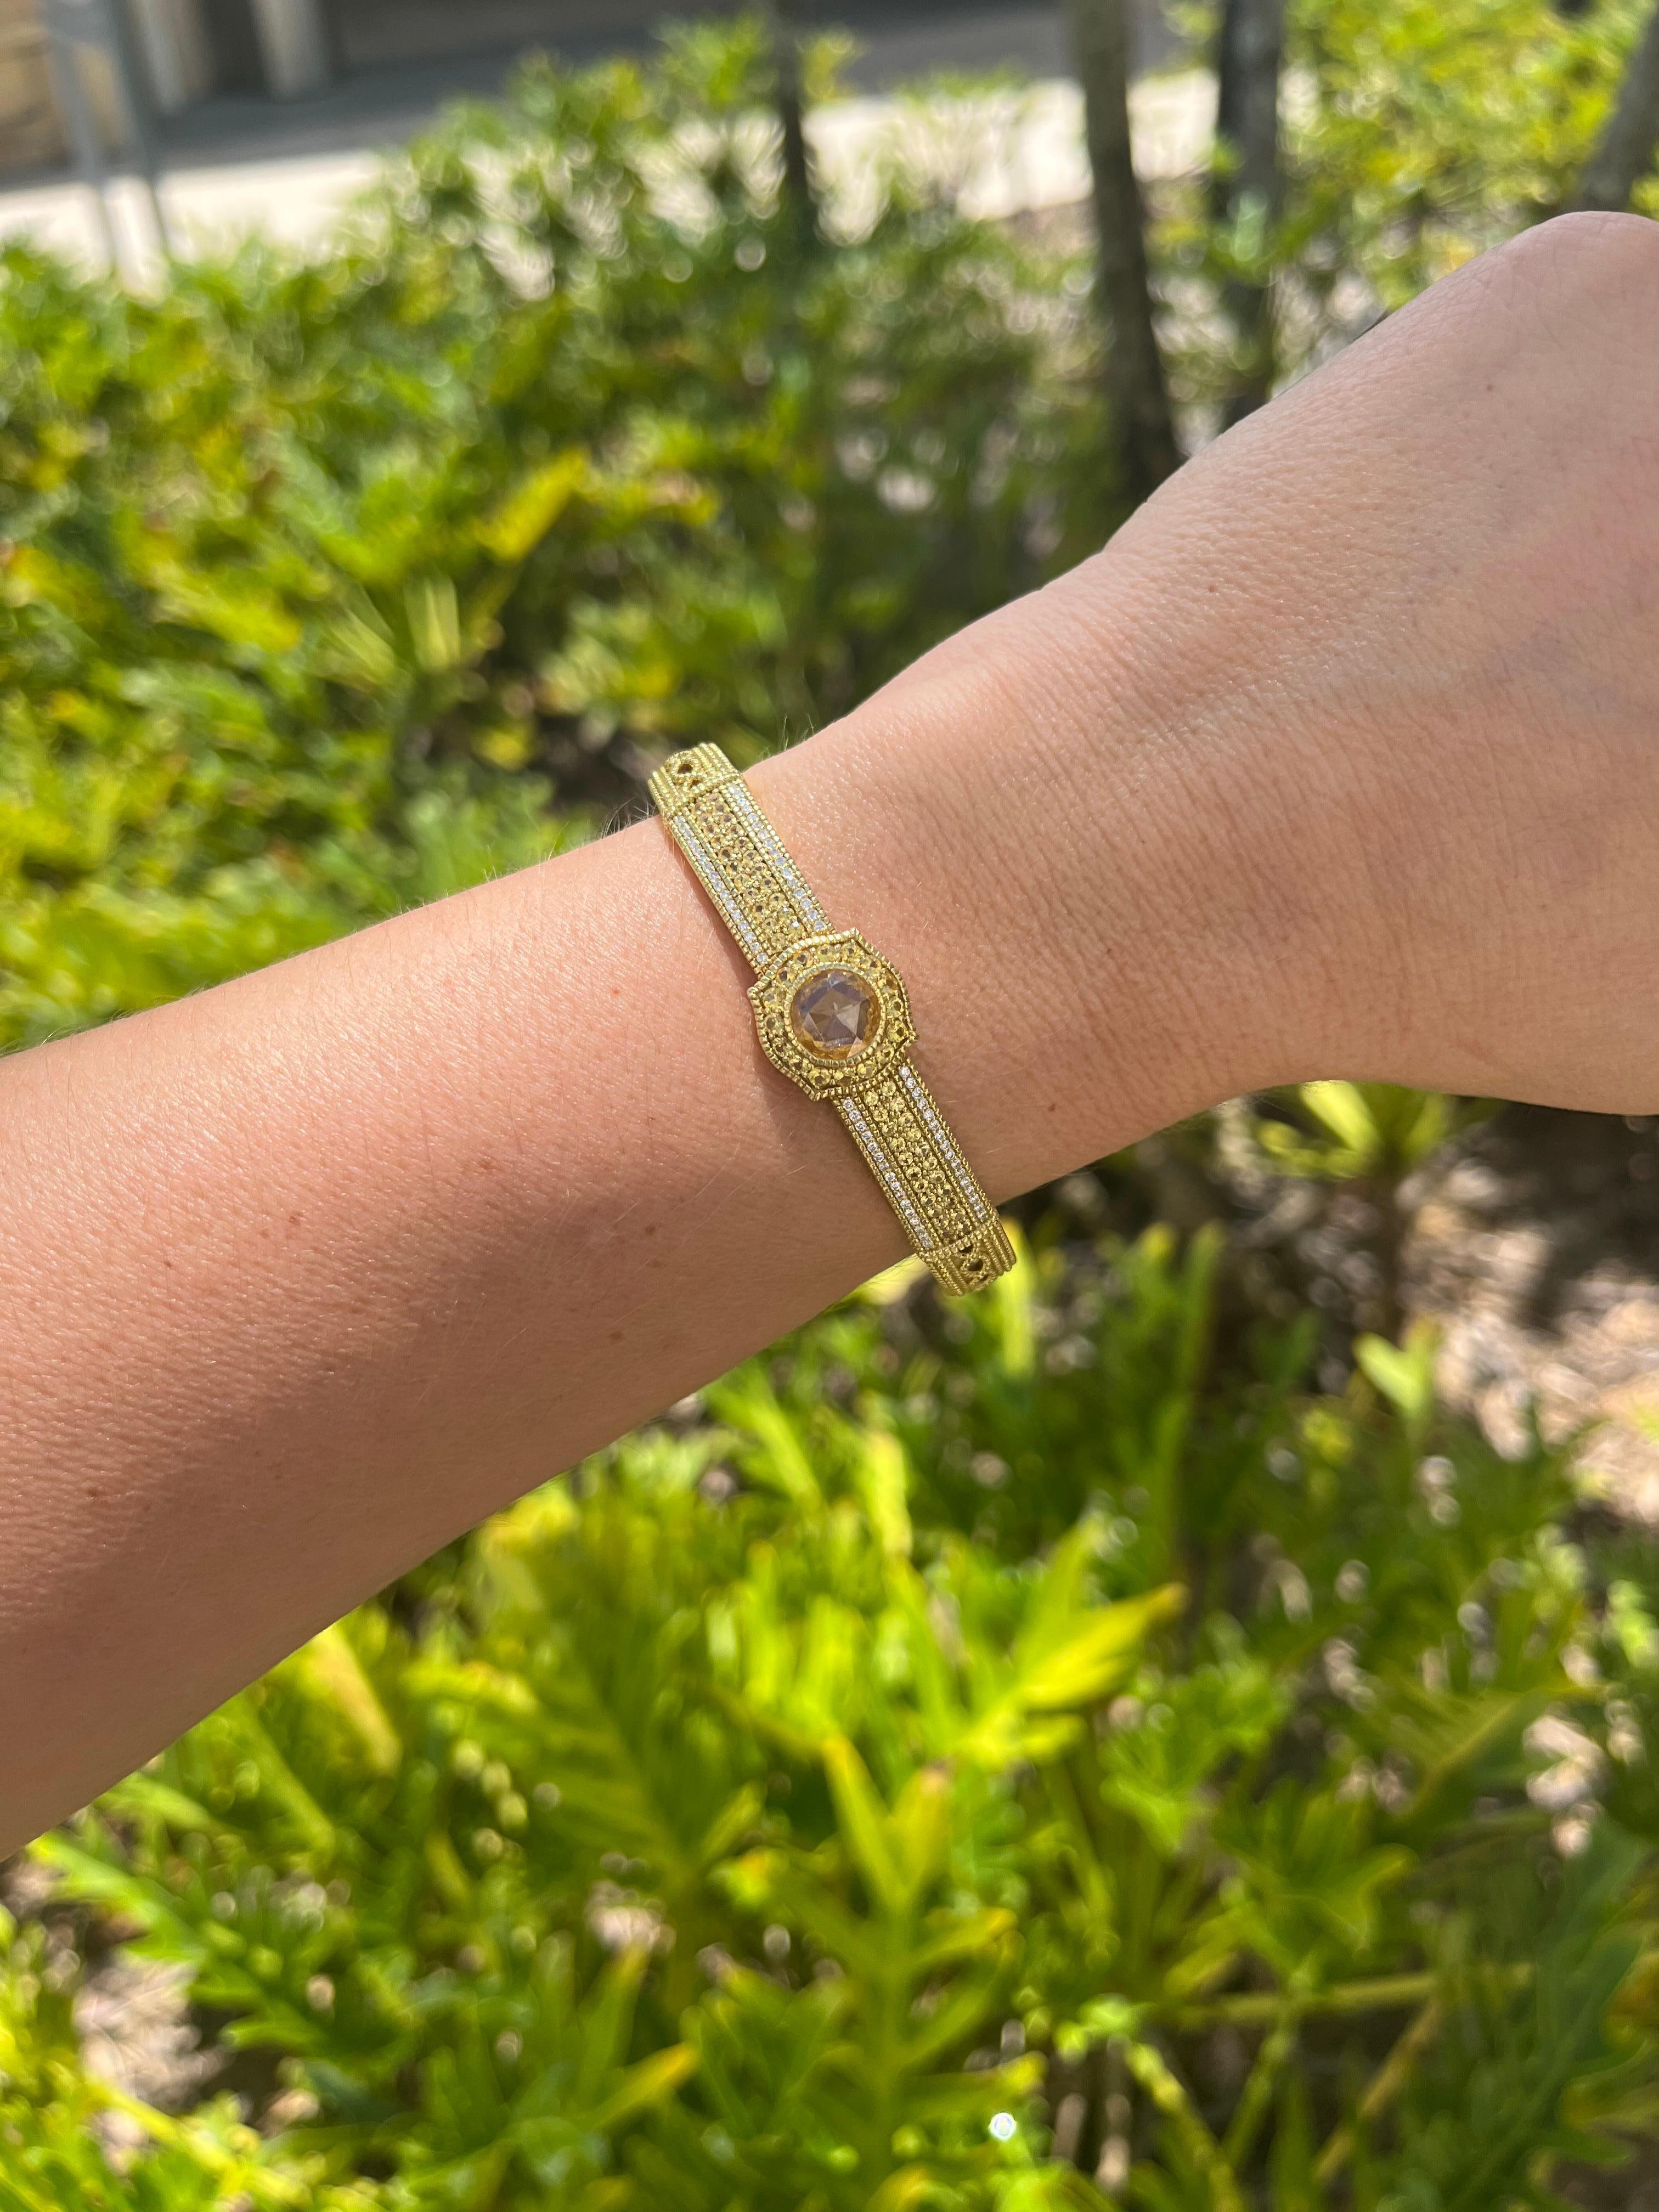 Elevate your jewelry collection with the timeless allure of the Judith Ripka 18k Yellow Gold Yellow Sapphire Bangle Bracelet. This exquisite piece exudes sophistication and luxury, designed to capture hearts and turn heads.

At its center, a